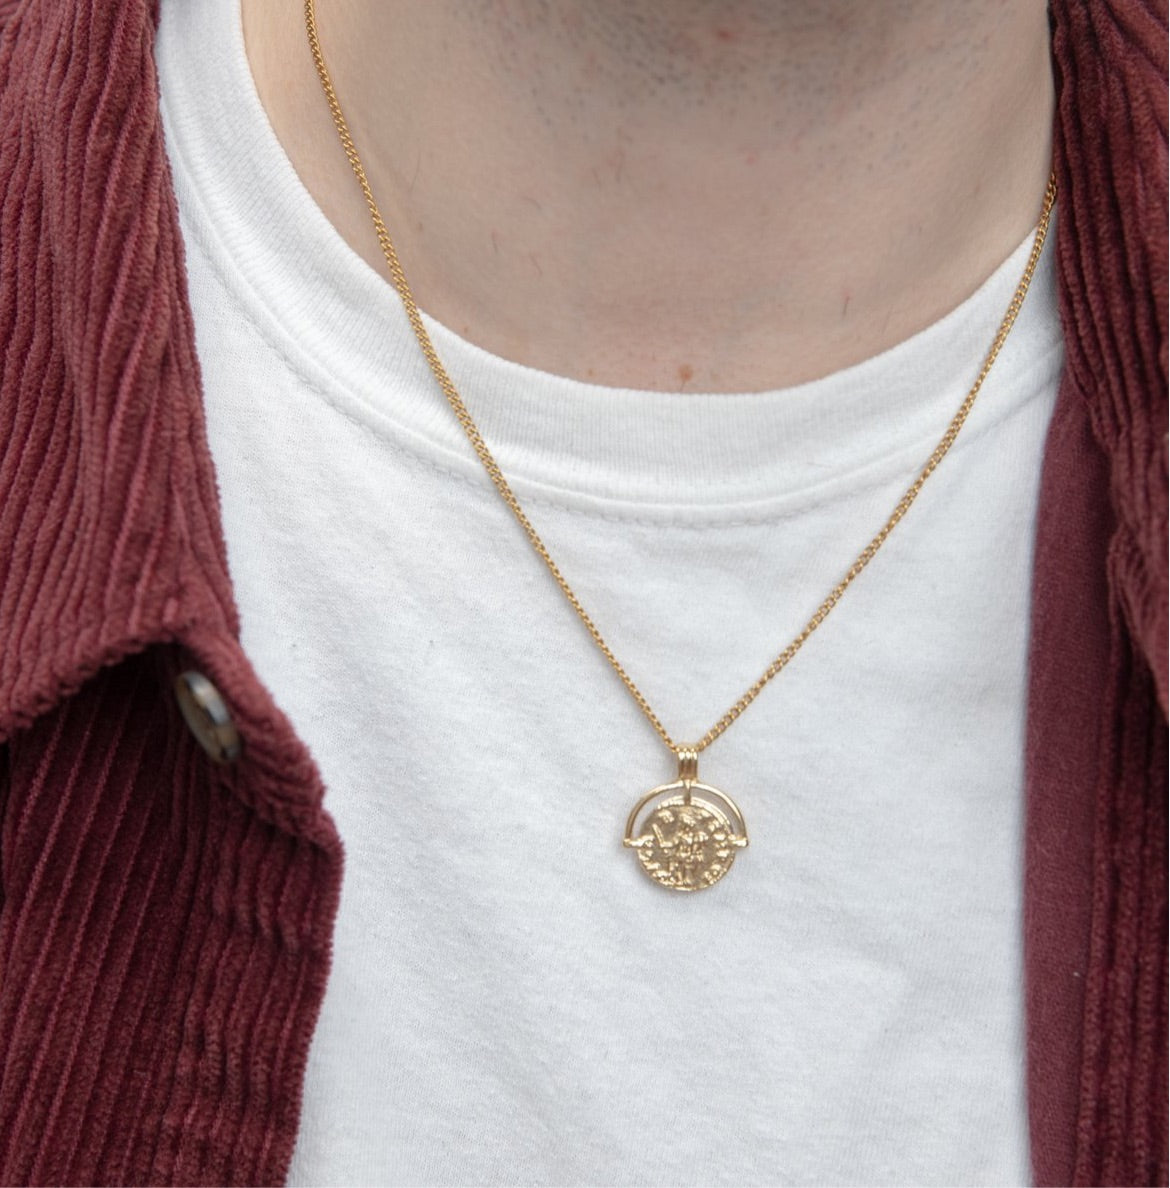 THE CLASSIC GOLD NECKLACE.